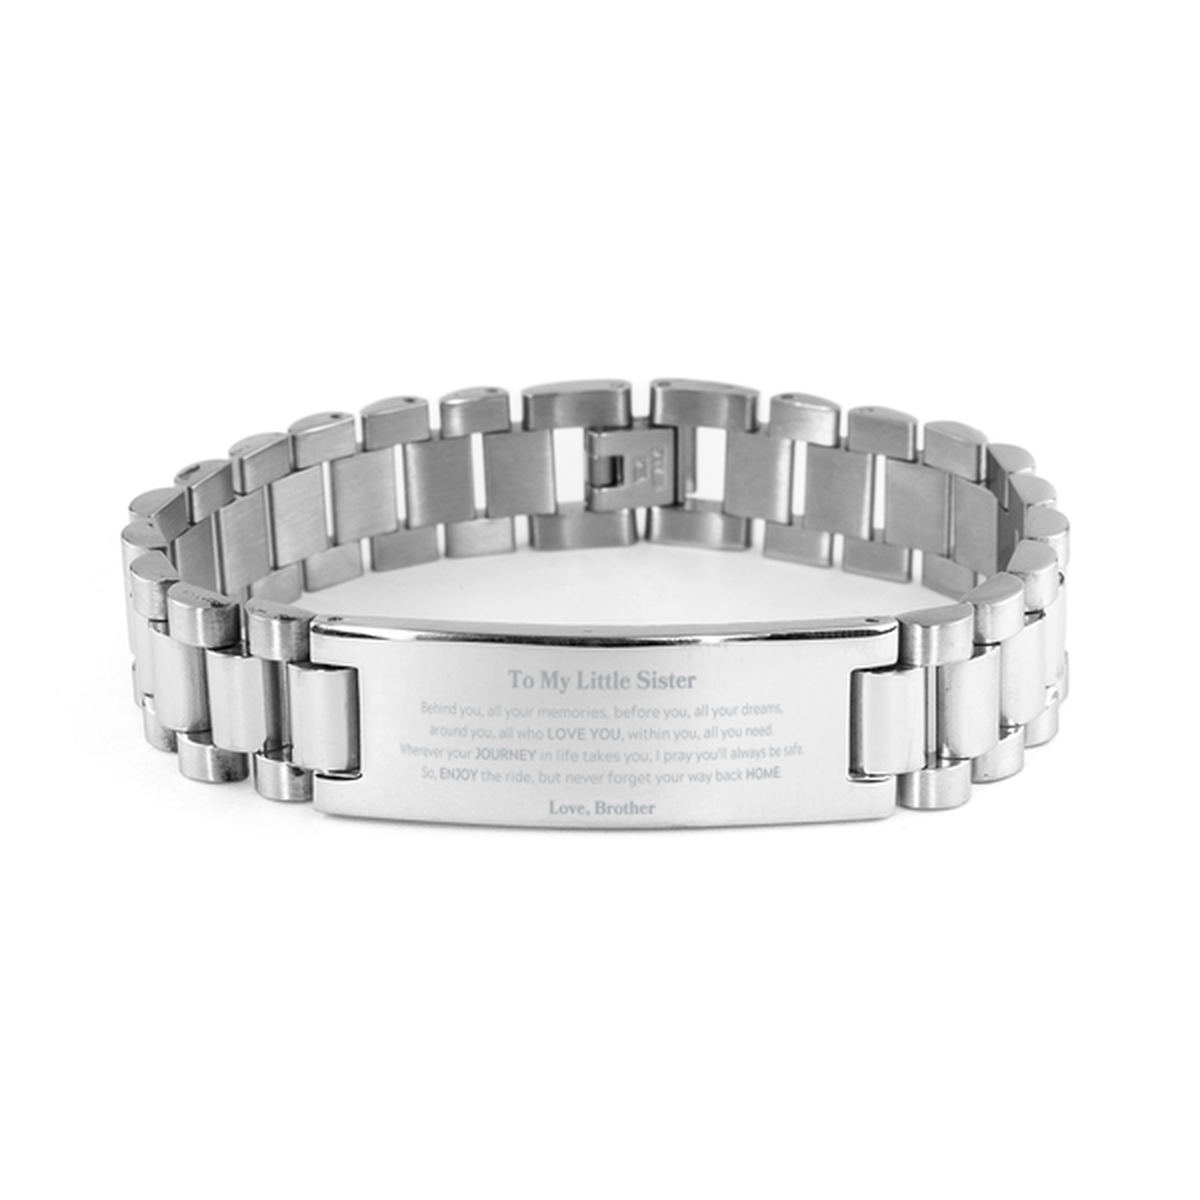 To My Little Sister Graduation Gifts from Brother, Little Sister Ladder Stainless Steel Bracelet Christmas Birthday Gifts for Little Sister Behind you, all your memories, before you, all your dreams. Love, Brother